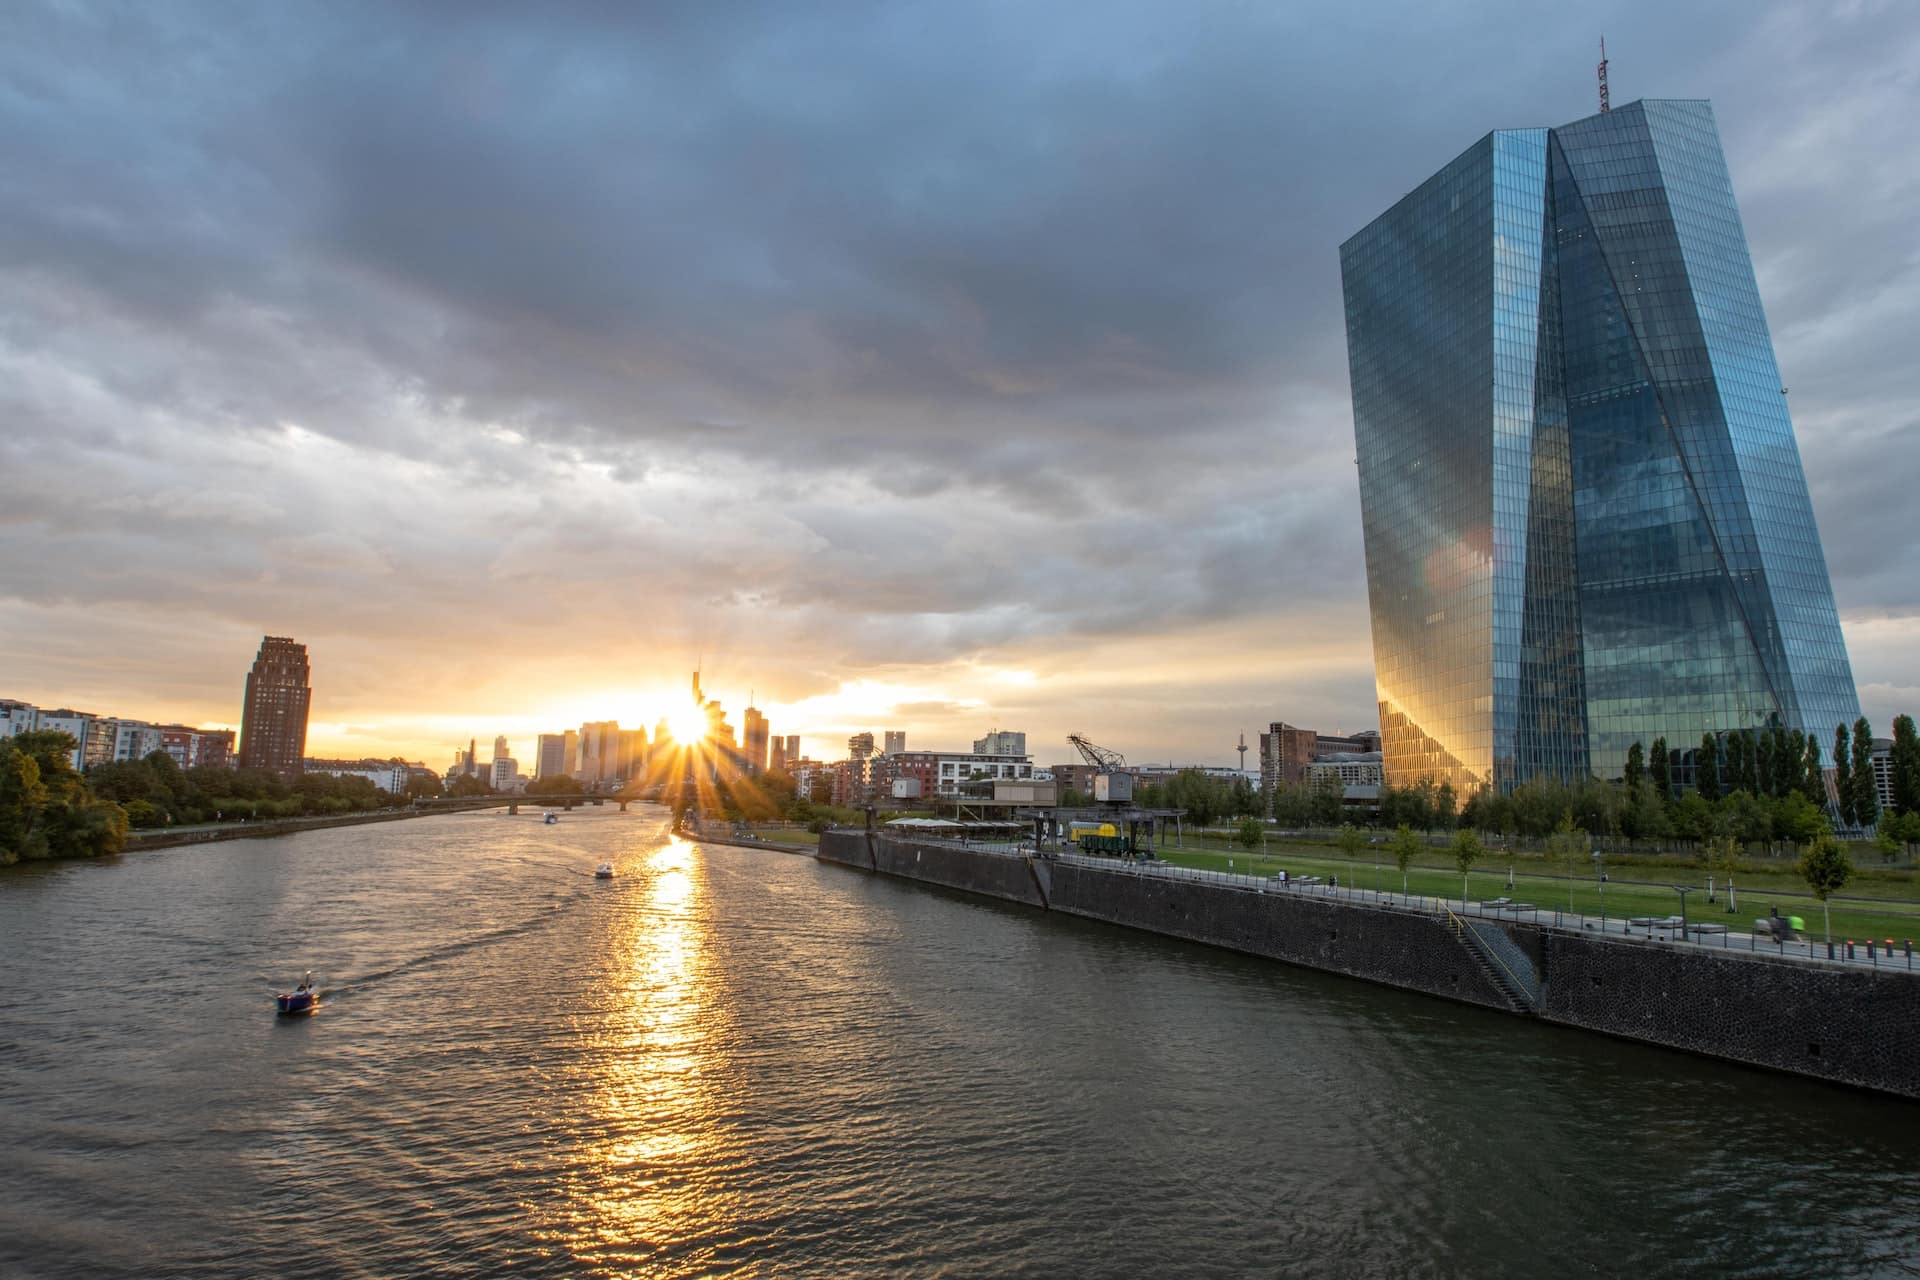 Home to the new European Central Bank headquarters, Ostend is an up-and-coming district in Frankfurt